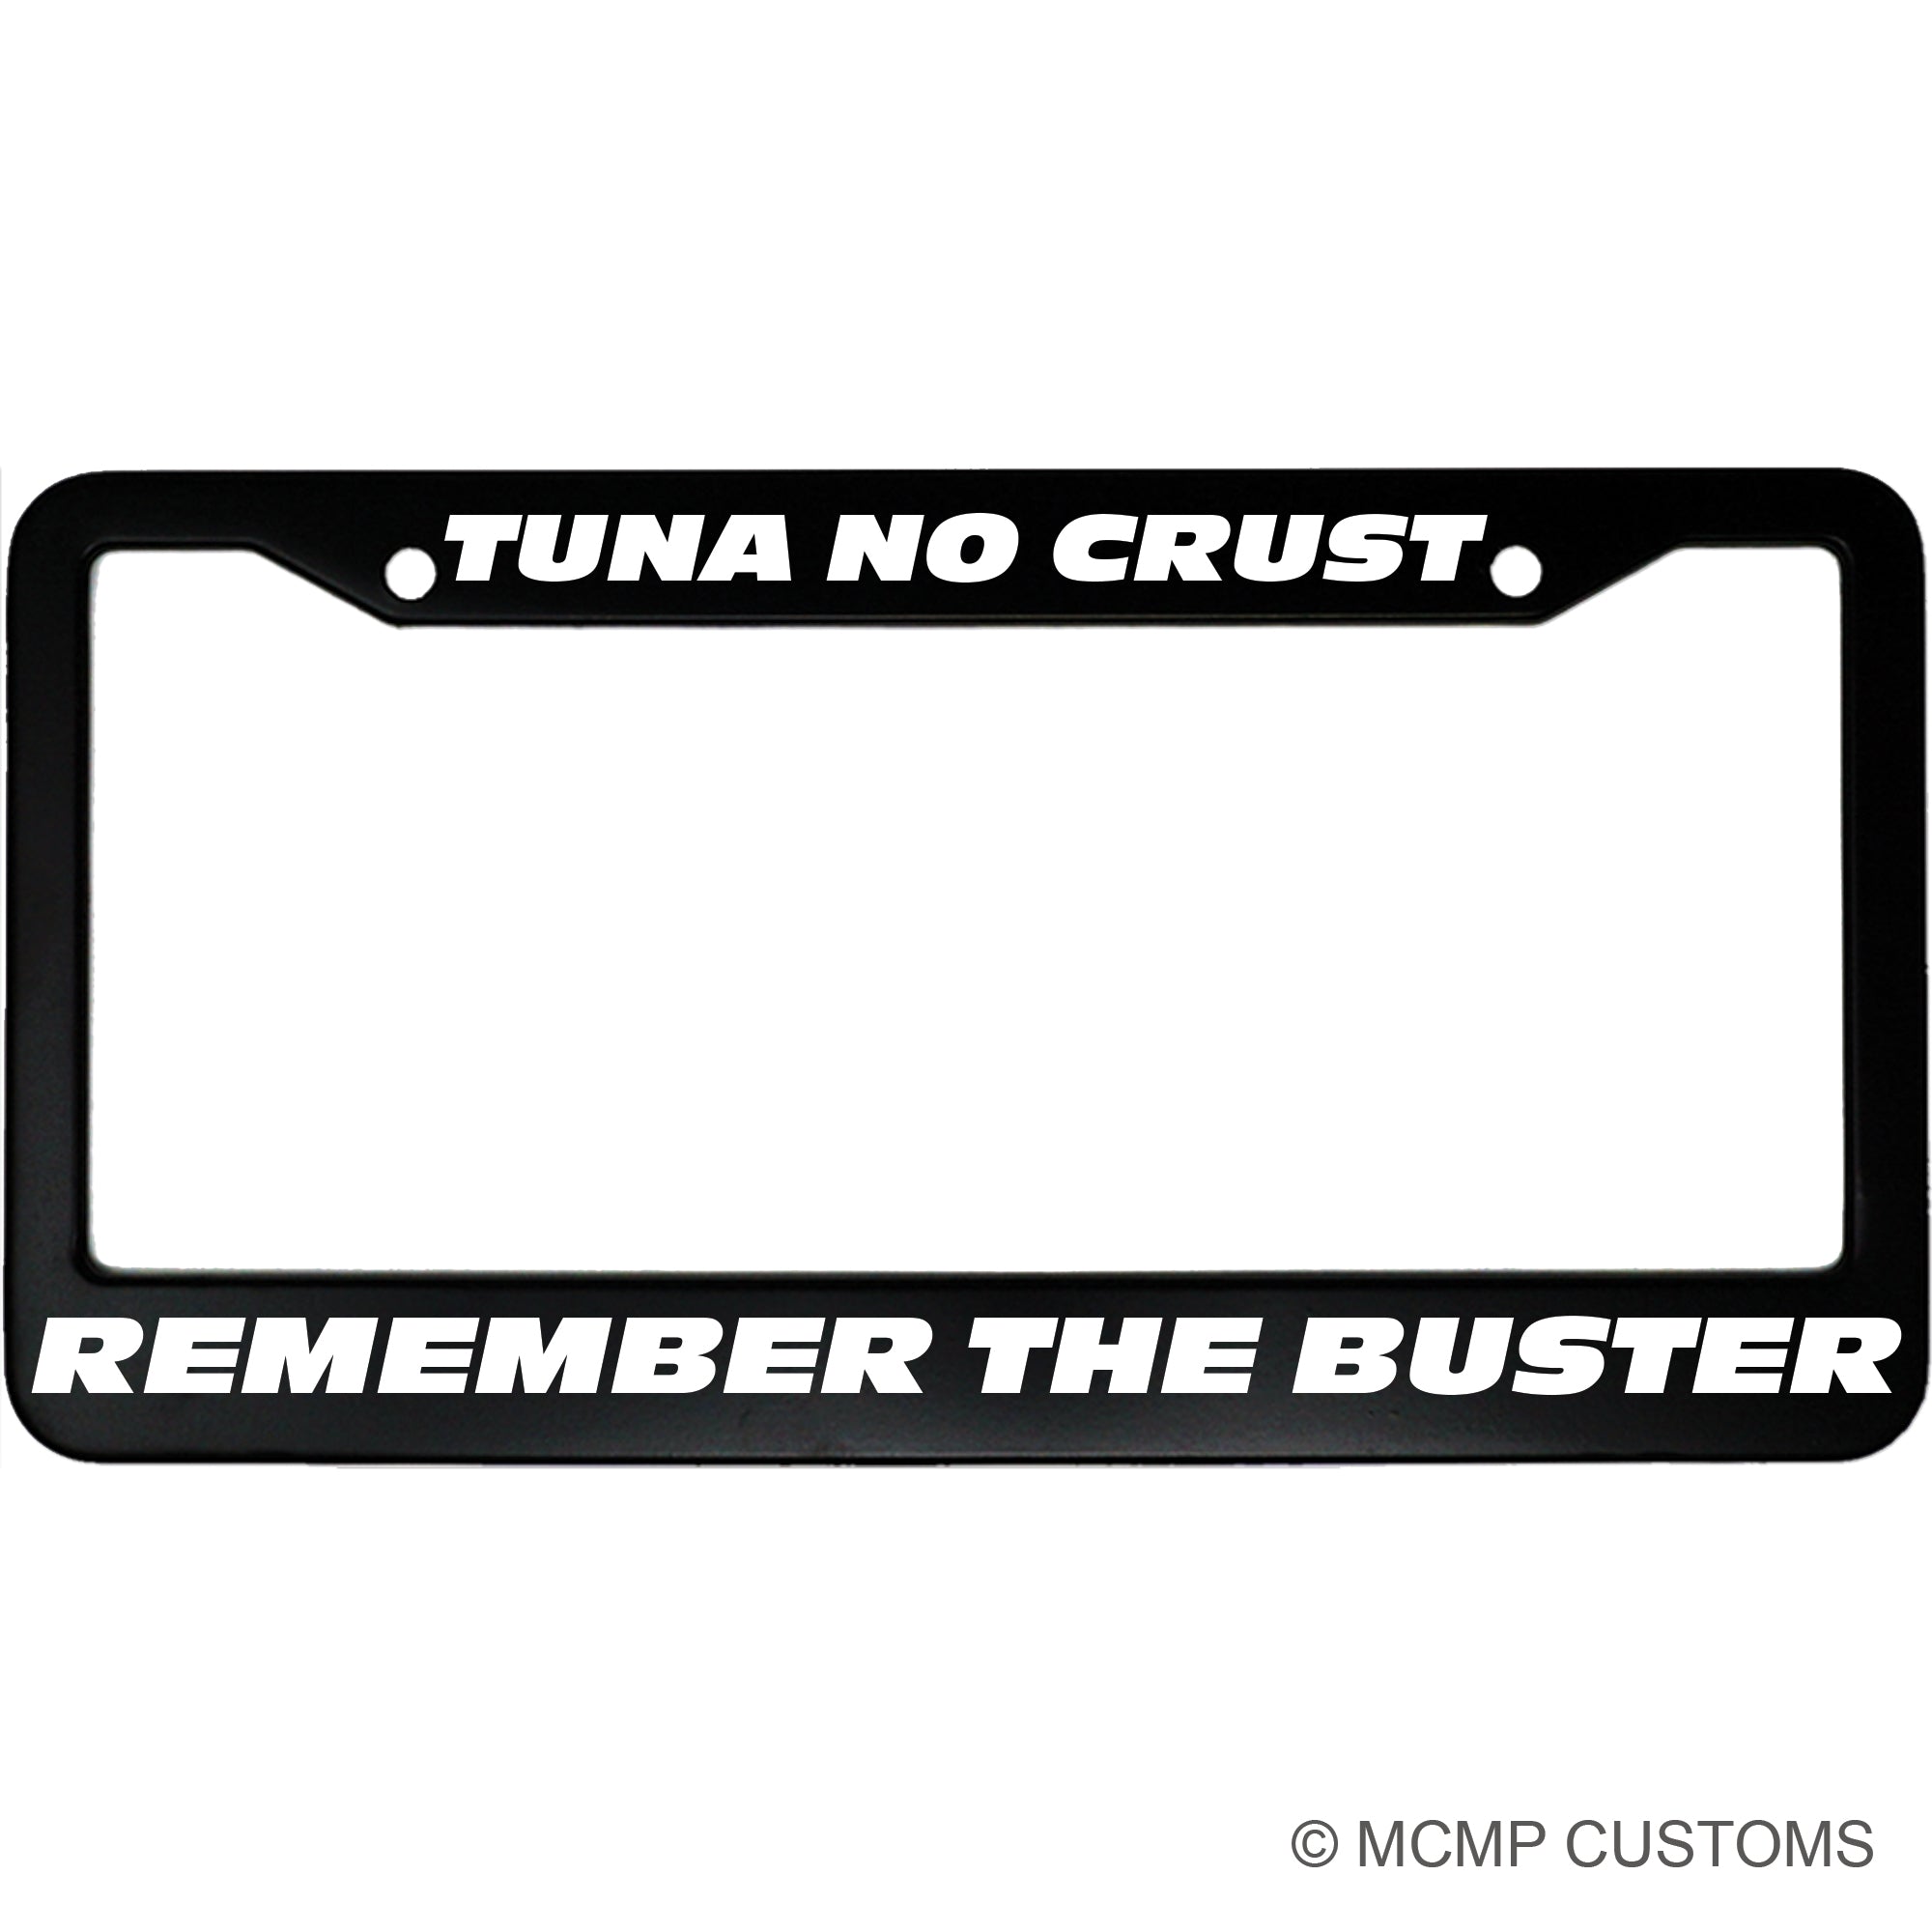 Tuna No Crust, Remember The Buster